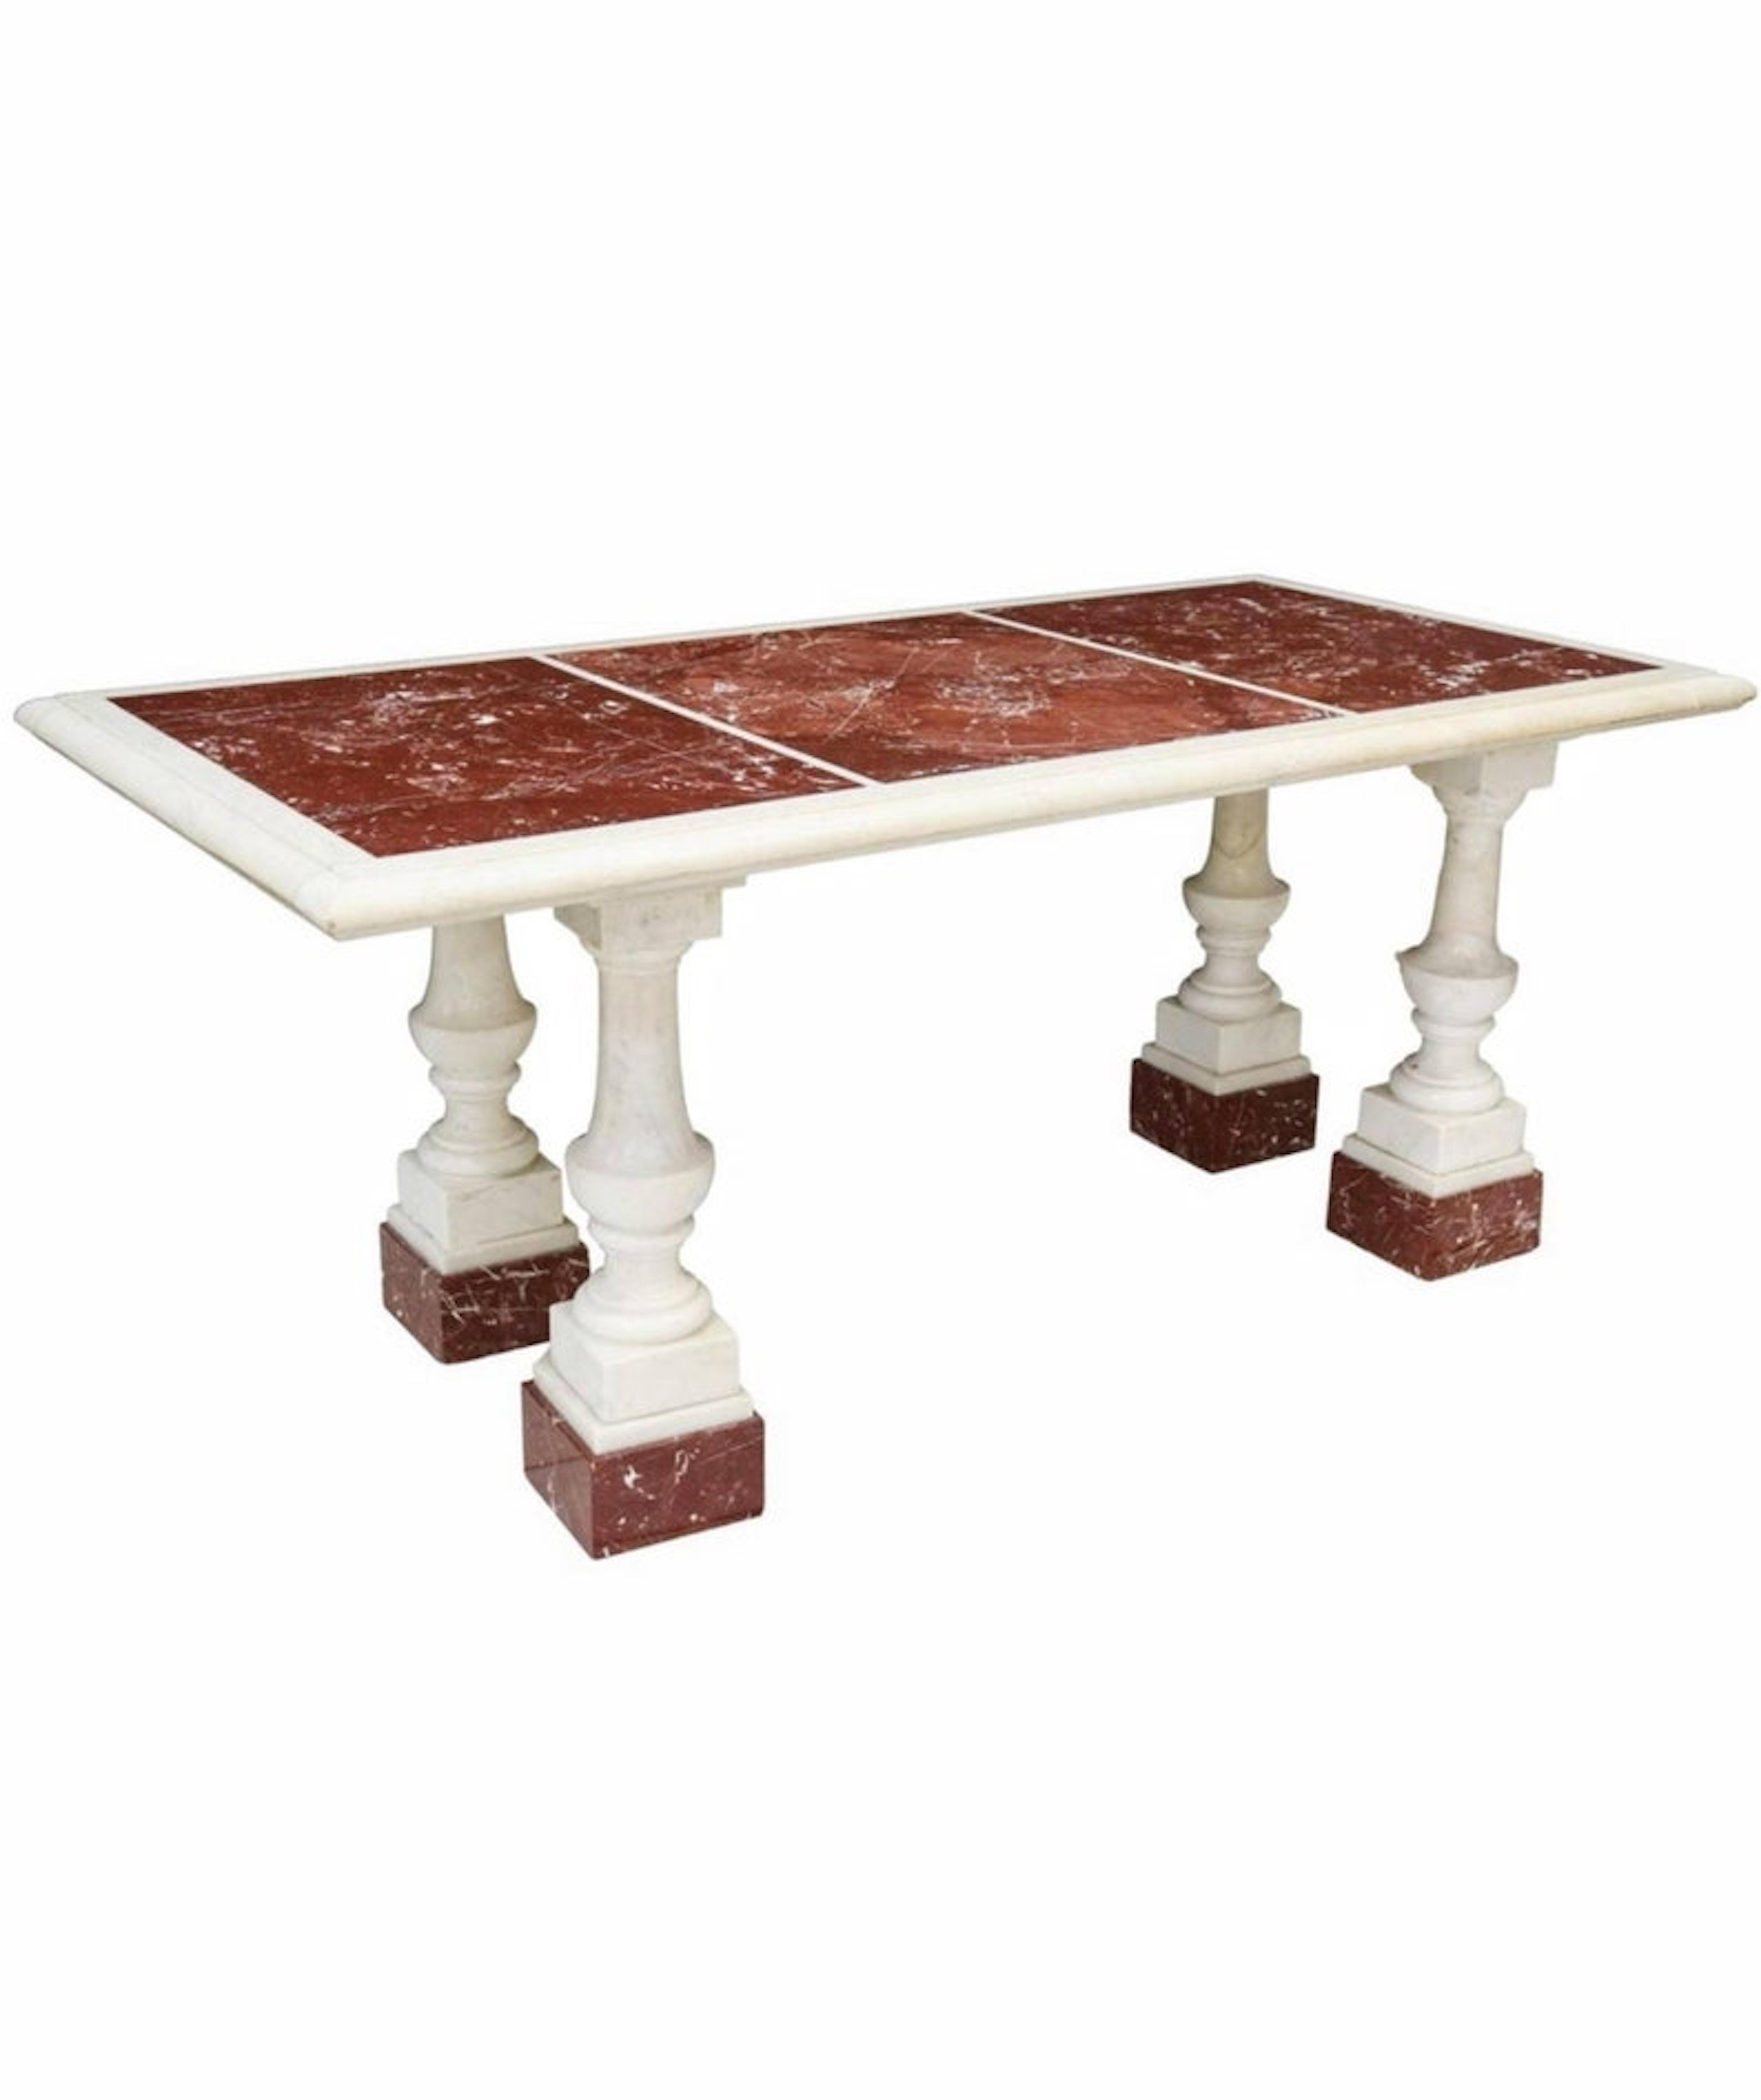 Large European Italian Grand Tour Neoclassical Style Marble Column Table For Sale 1